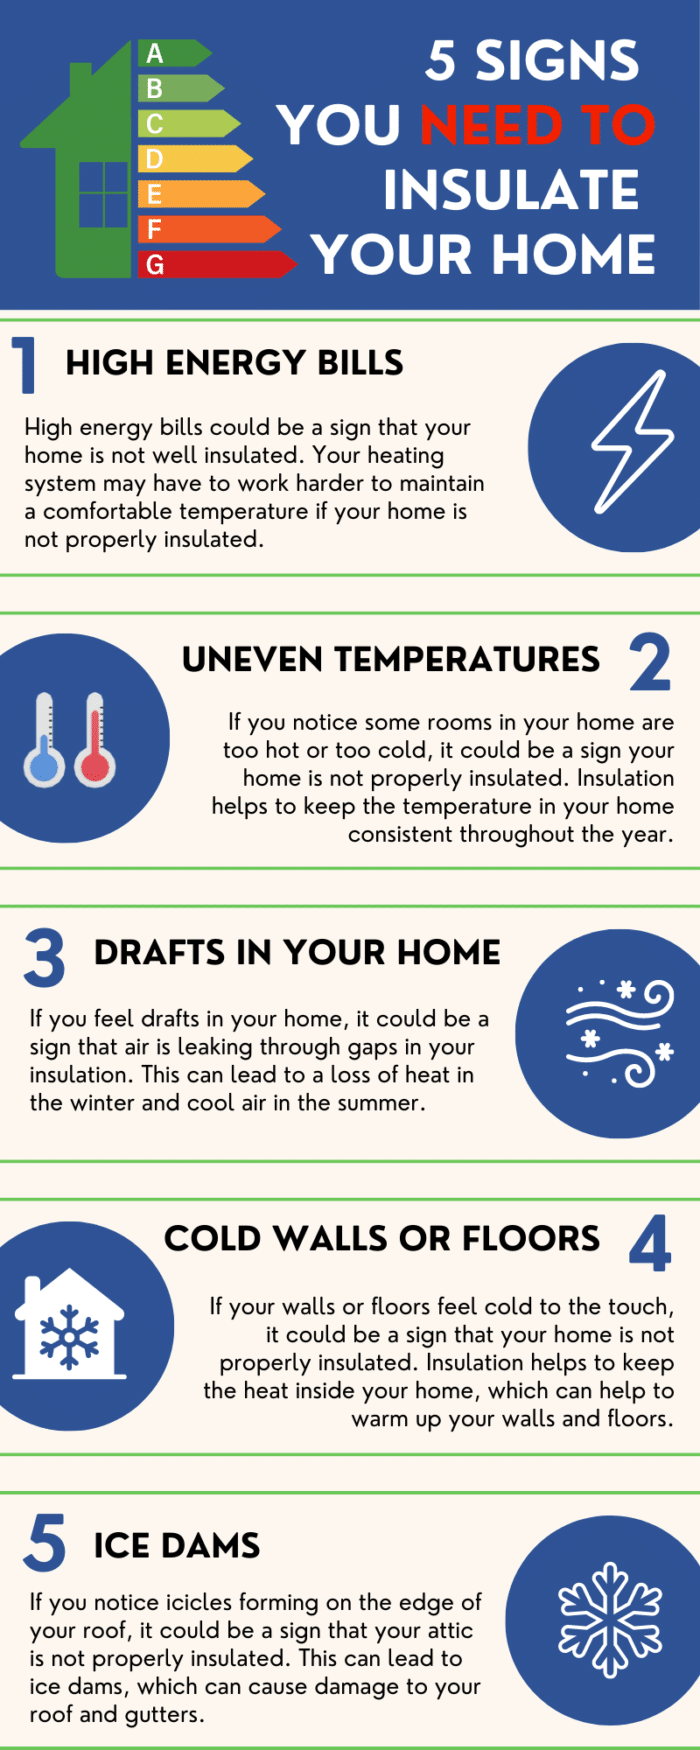 Home insulation - 5 signs you need to insulate your home!